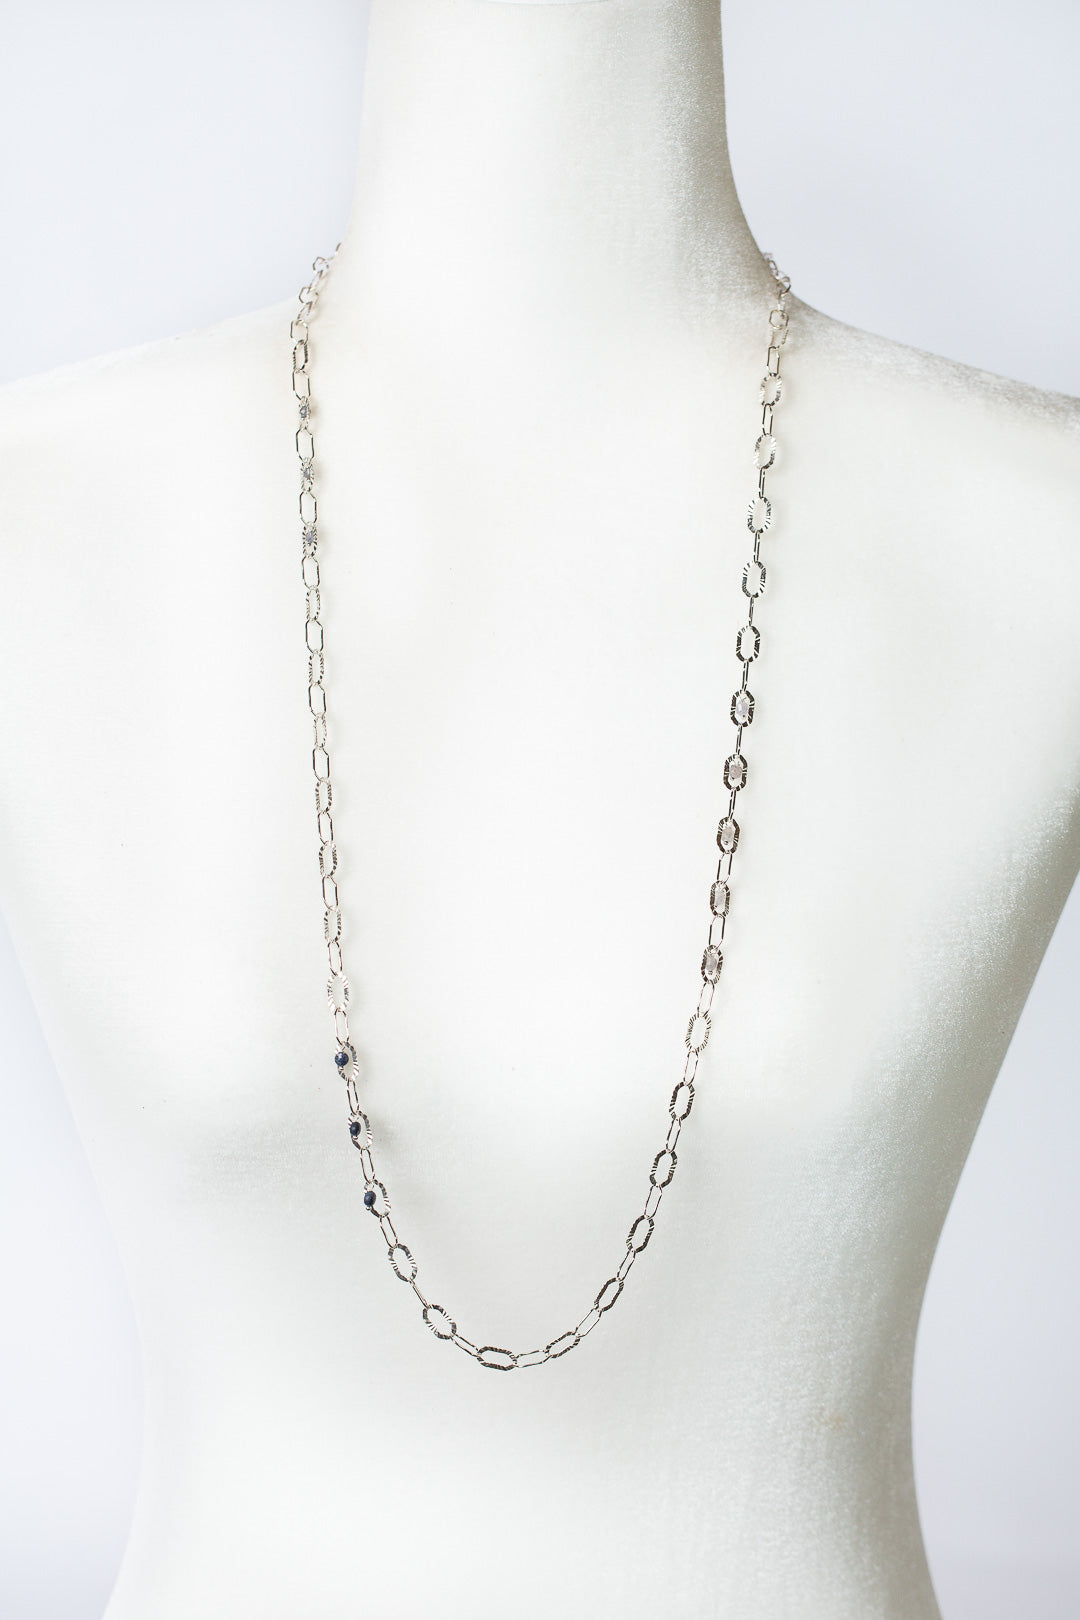 Ethereal 35-37" Iolite, Sodalite Simple Necklace